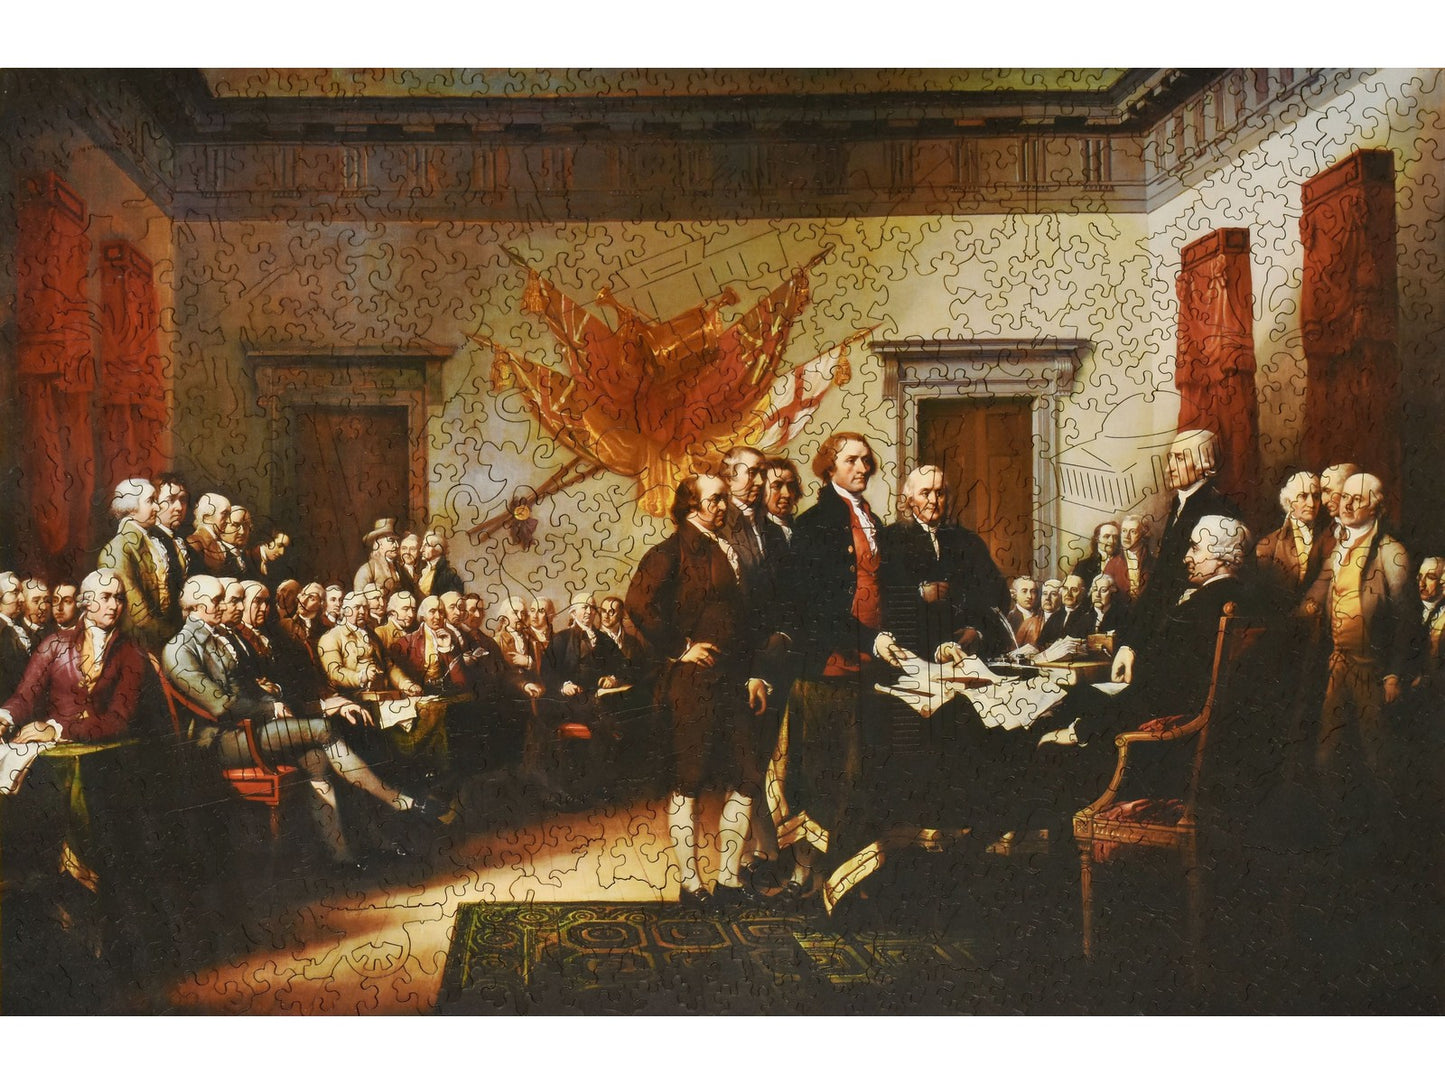 The front of the puzzle, Declaration of Independence, which shows the signing of the Declaration of Independence by the founding fathers of the united states.